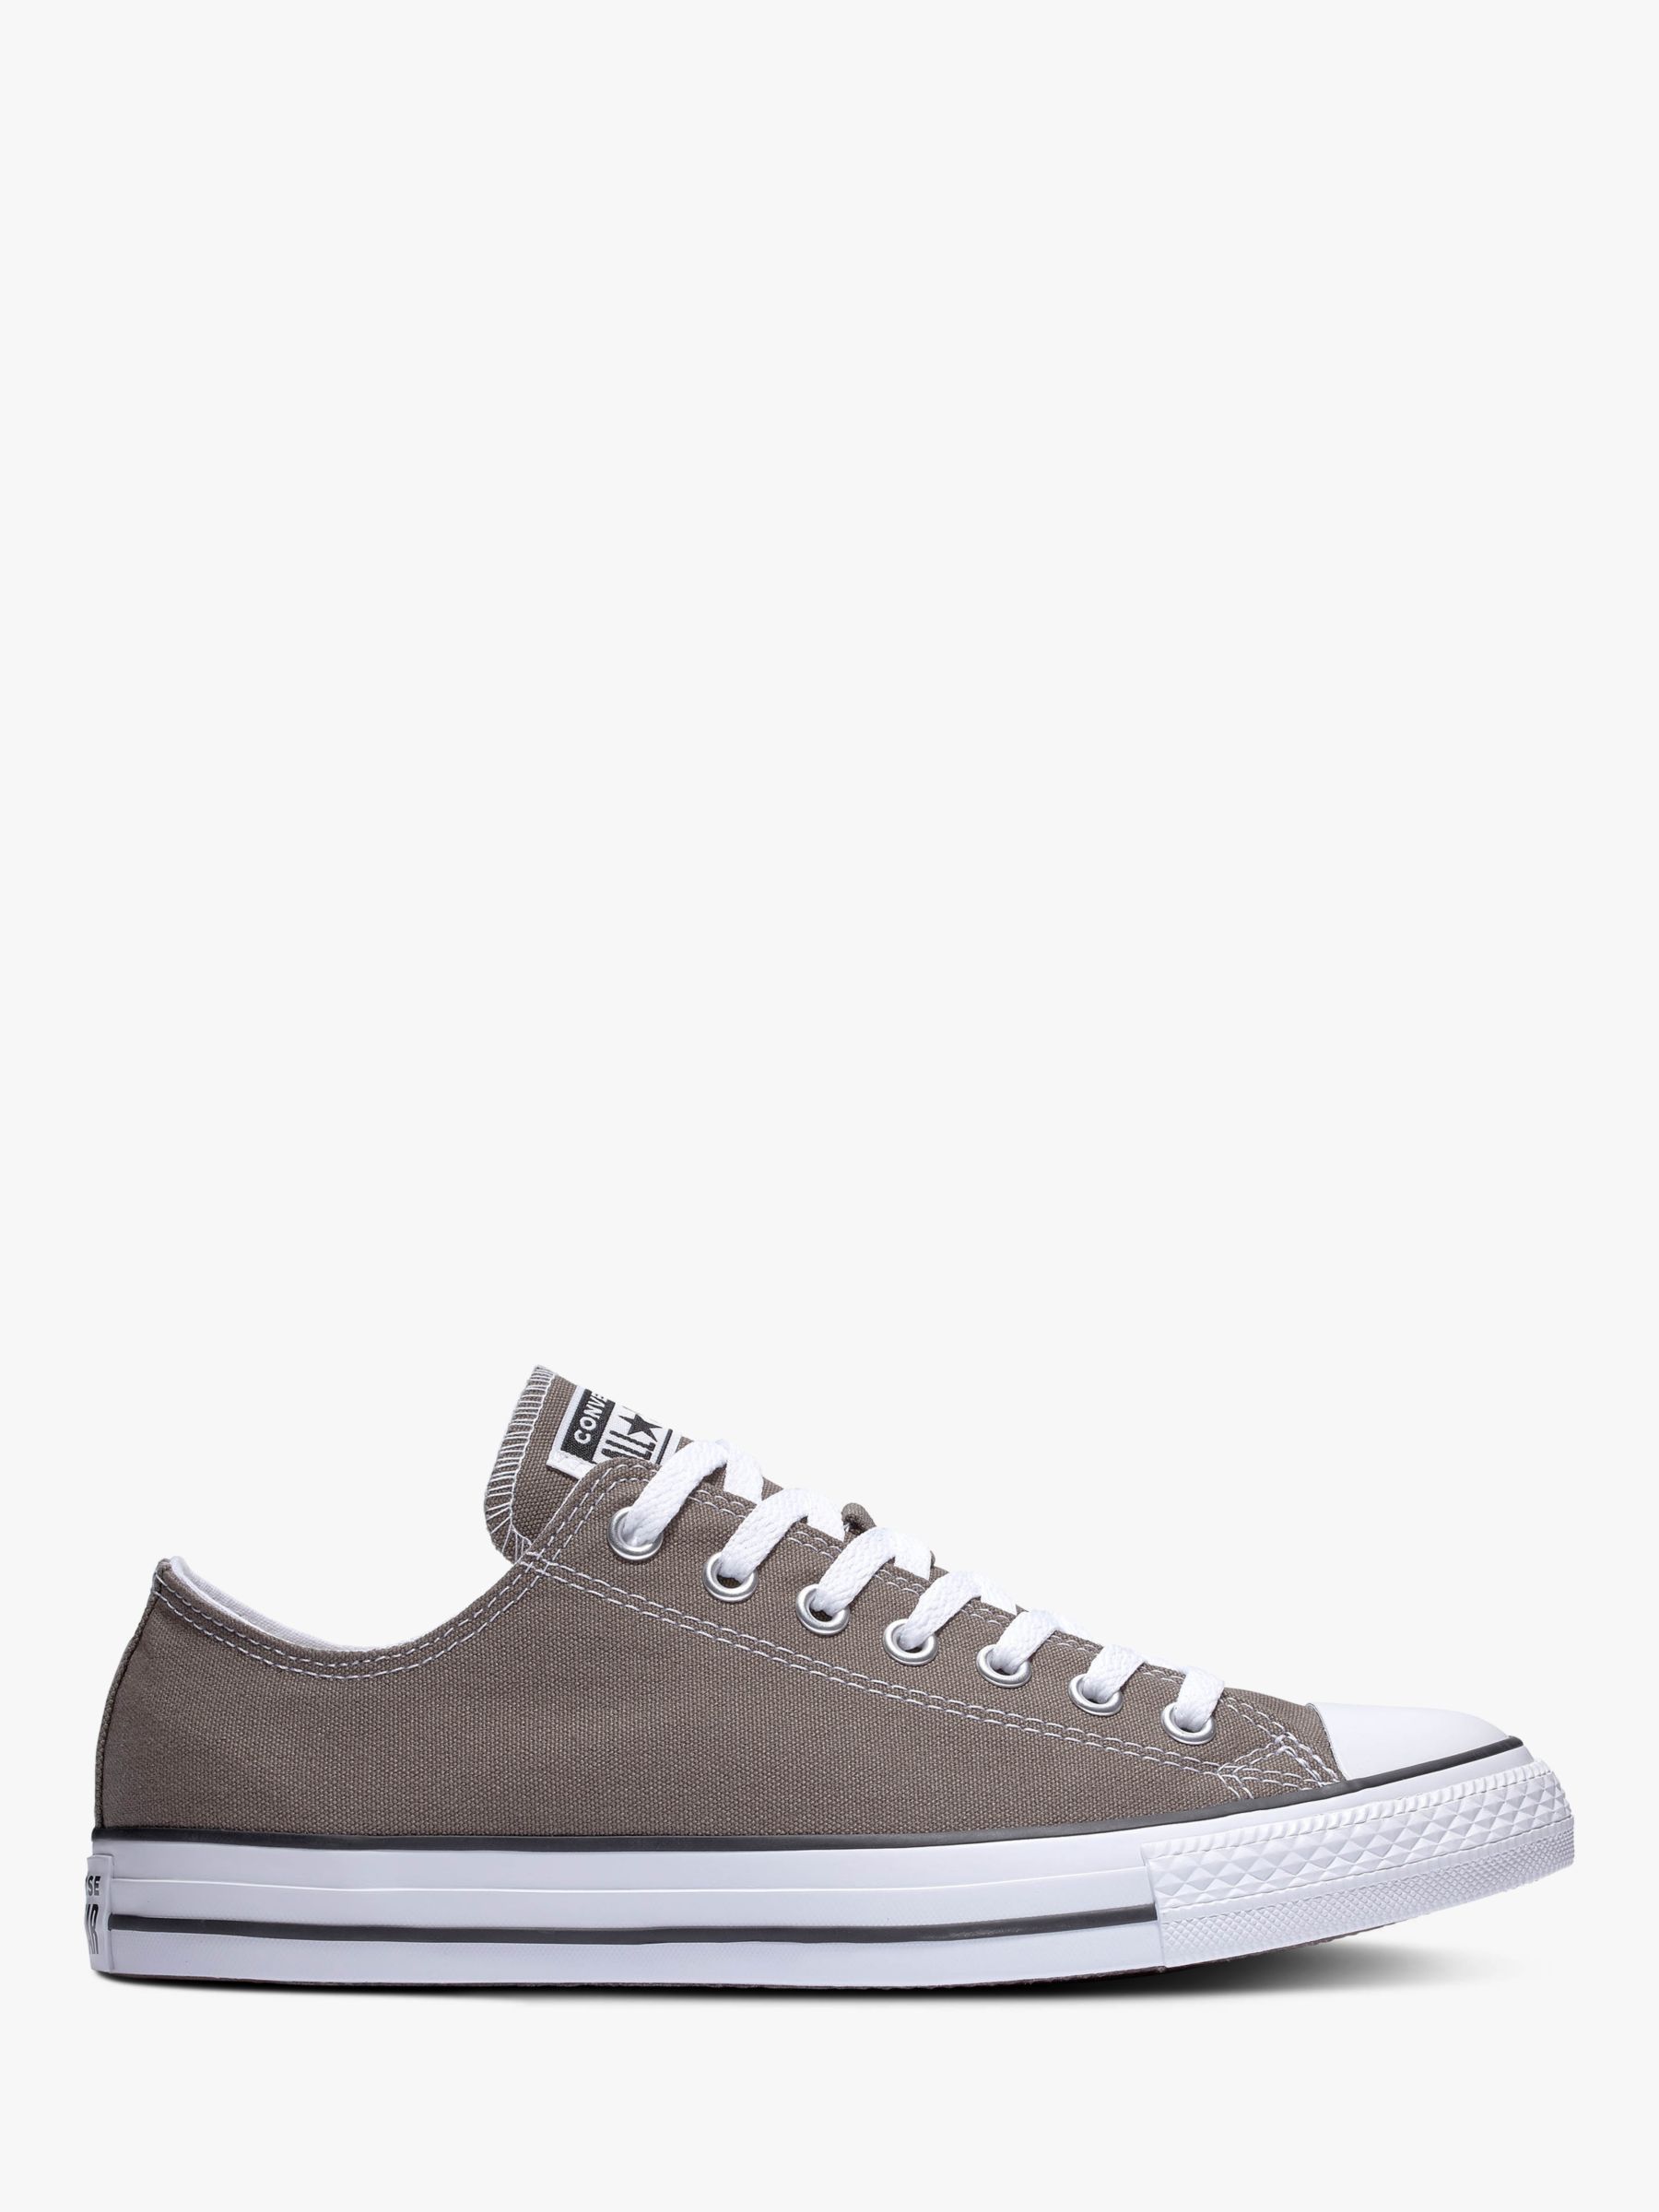 converse chuck taylor all star ox low top